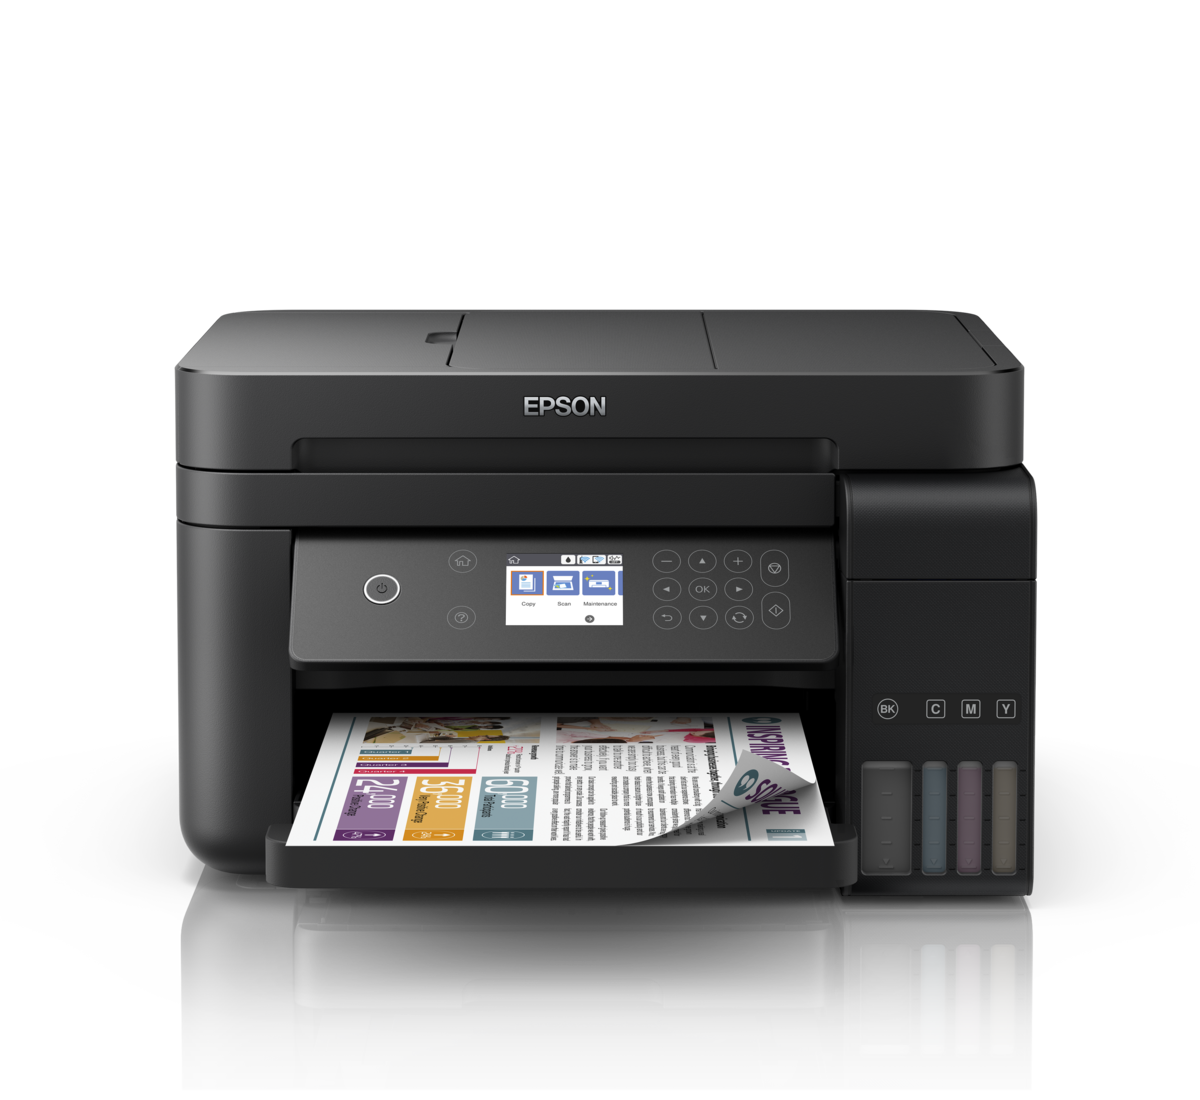 What is the general error problem on Epson printers?